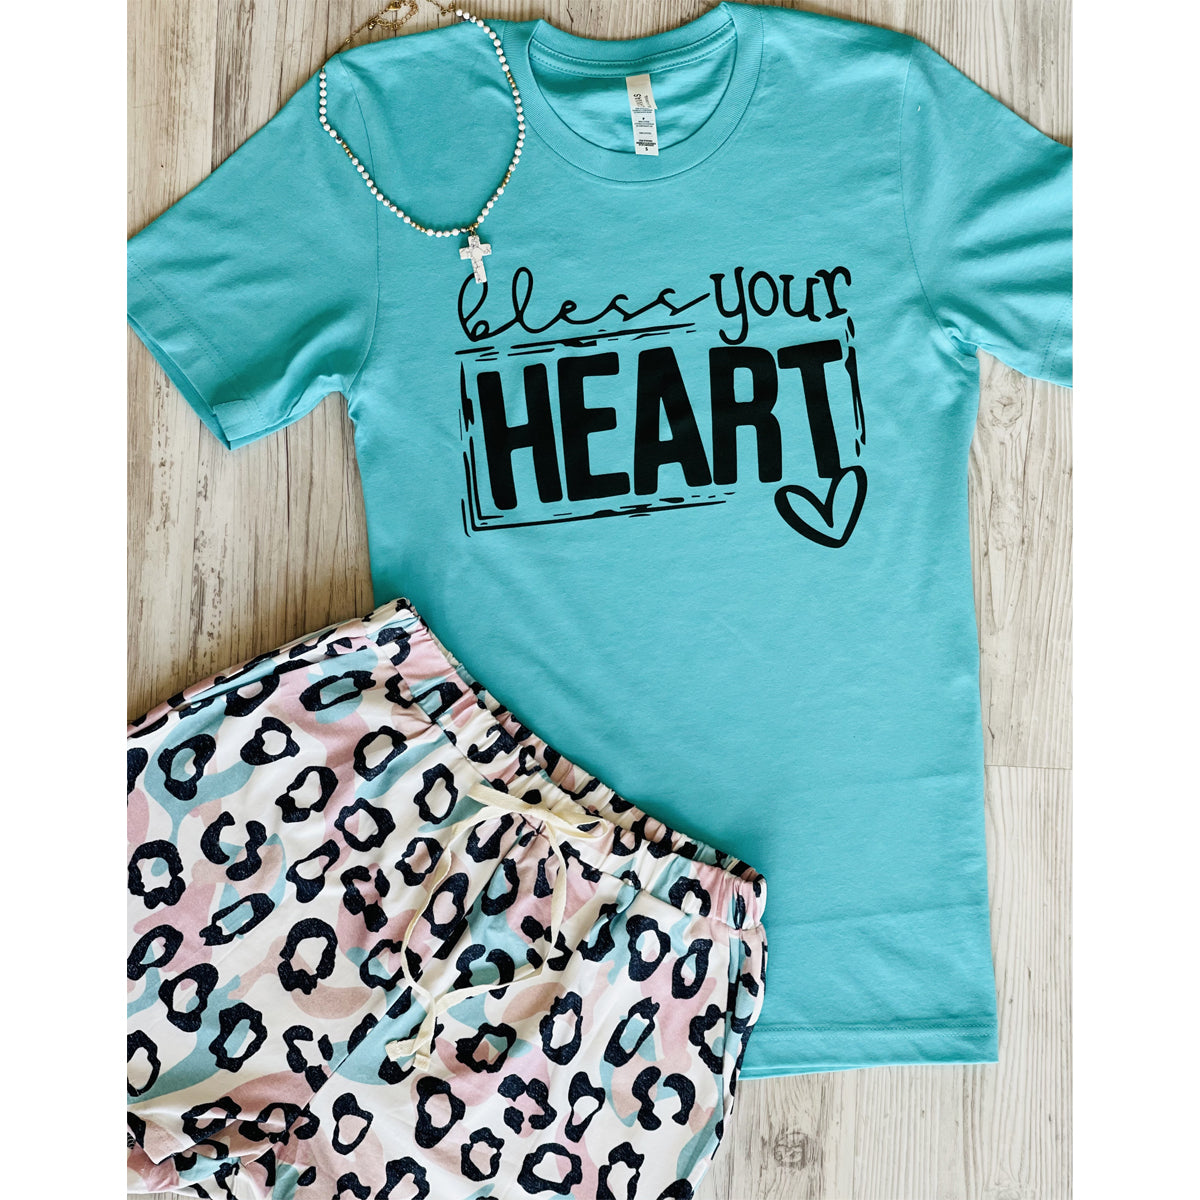 Bless Your Heart Set (Teal Tee/ Pink/Teal Leopard Shorts) - Southern Grace Creations